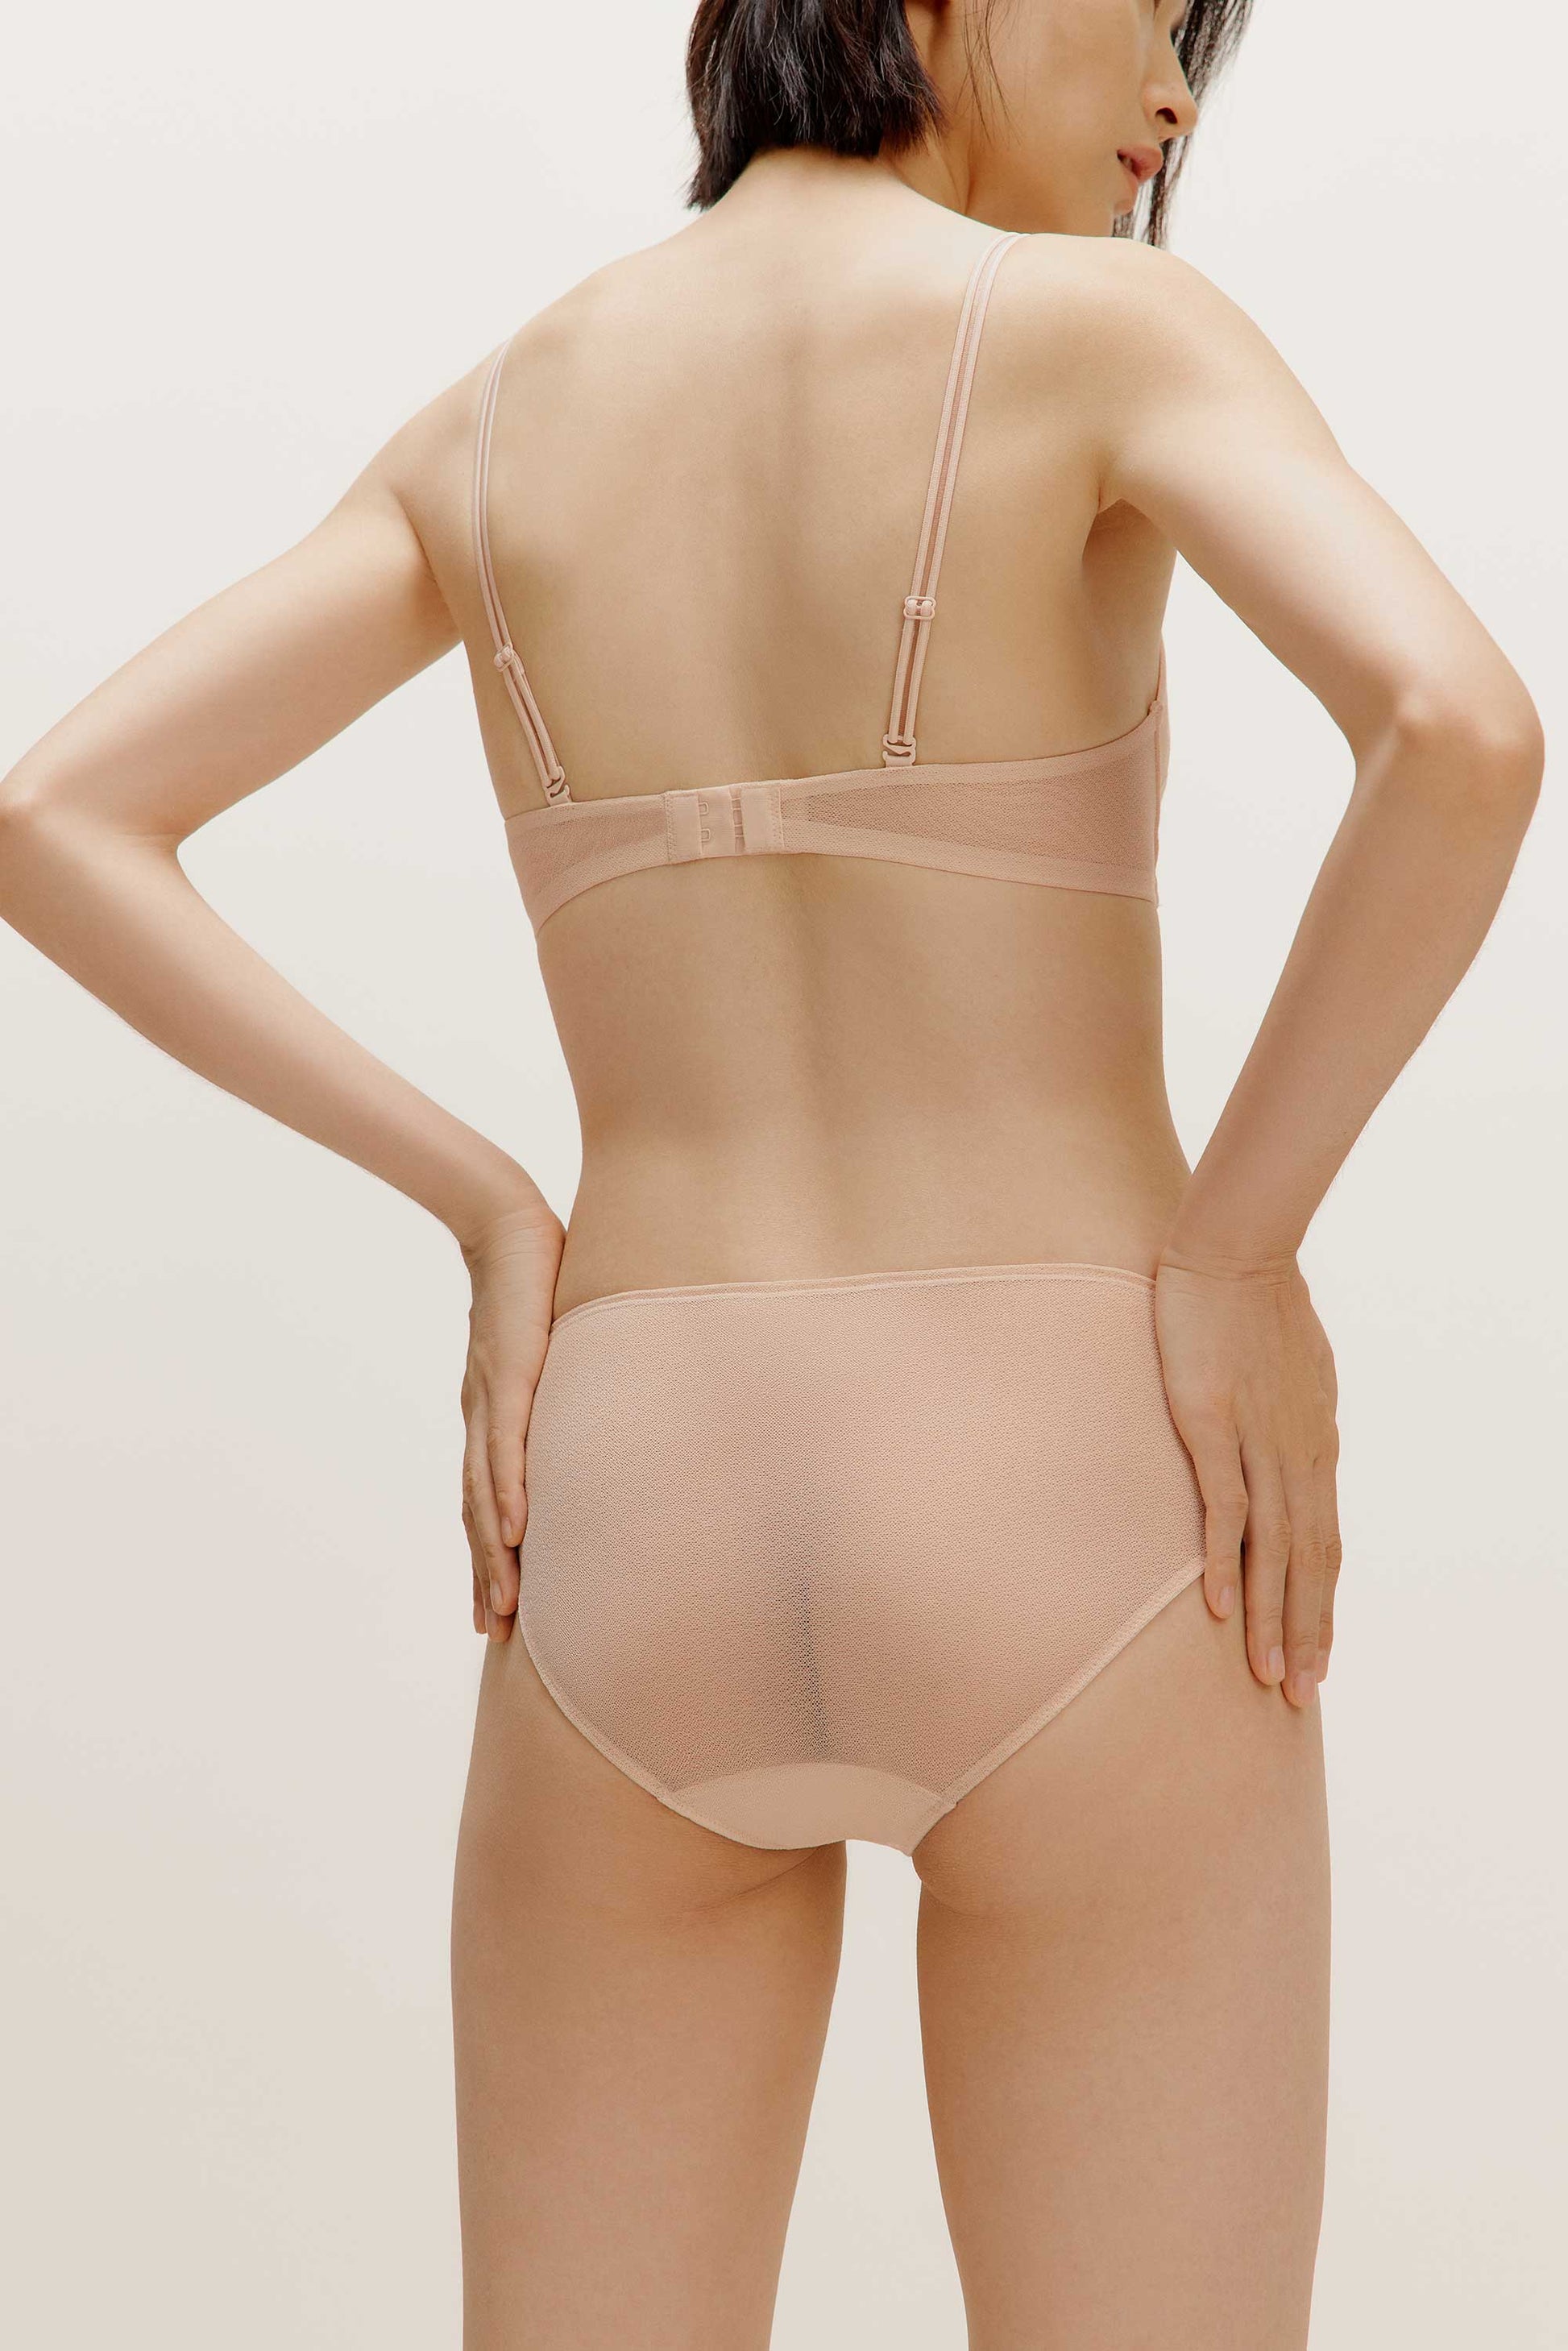 A woman wearing a nude bra and brief from back